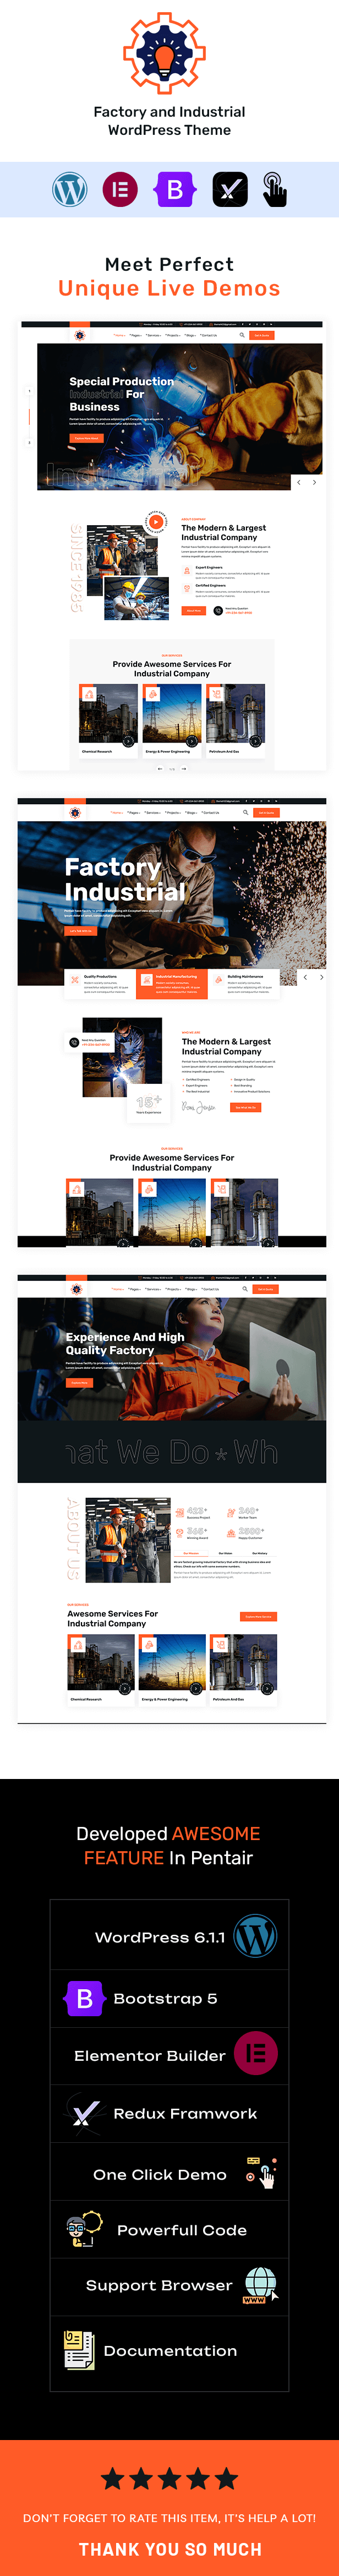 Pentair - Factory and Industrial WordPress Theme - 2